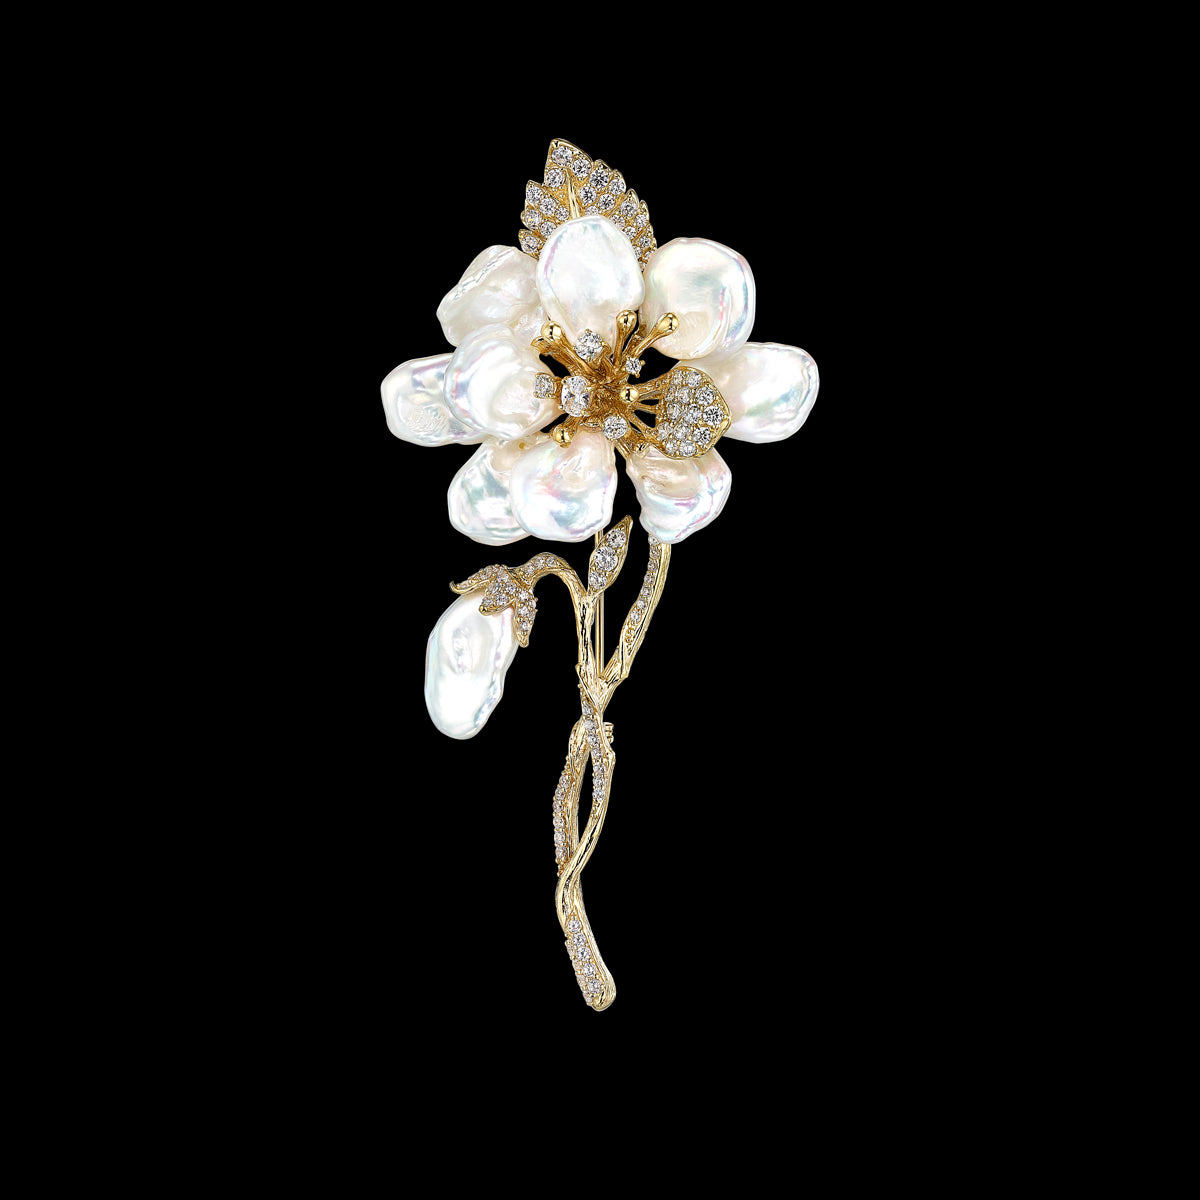 Gold Cherry Corsage Brooch, Brooch, Anabela Chan Joaillerie - Fine jewelry with laboratory grown and created gemstones hand-crafted in the United Kingdom. Anabela Chan Joaillerie is the first fine jewellery brand in the world to champion laboratory-grown and created gemstones with high jewellery design, artisanal craftsmanship and a focus on ethical and sustainable innovations.